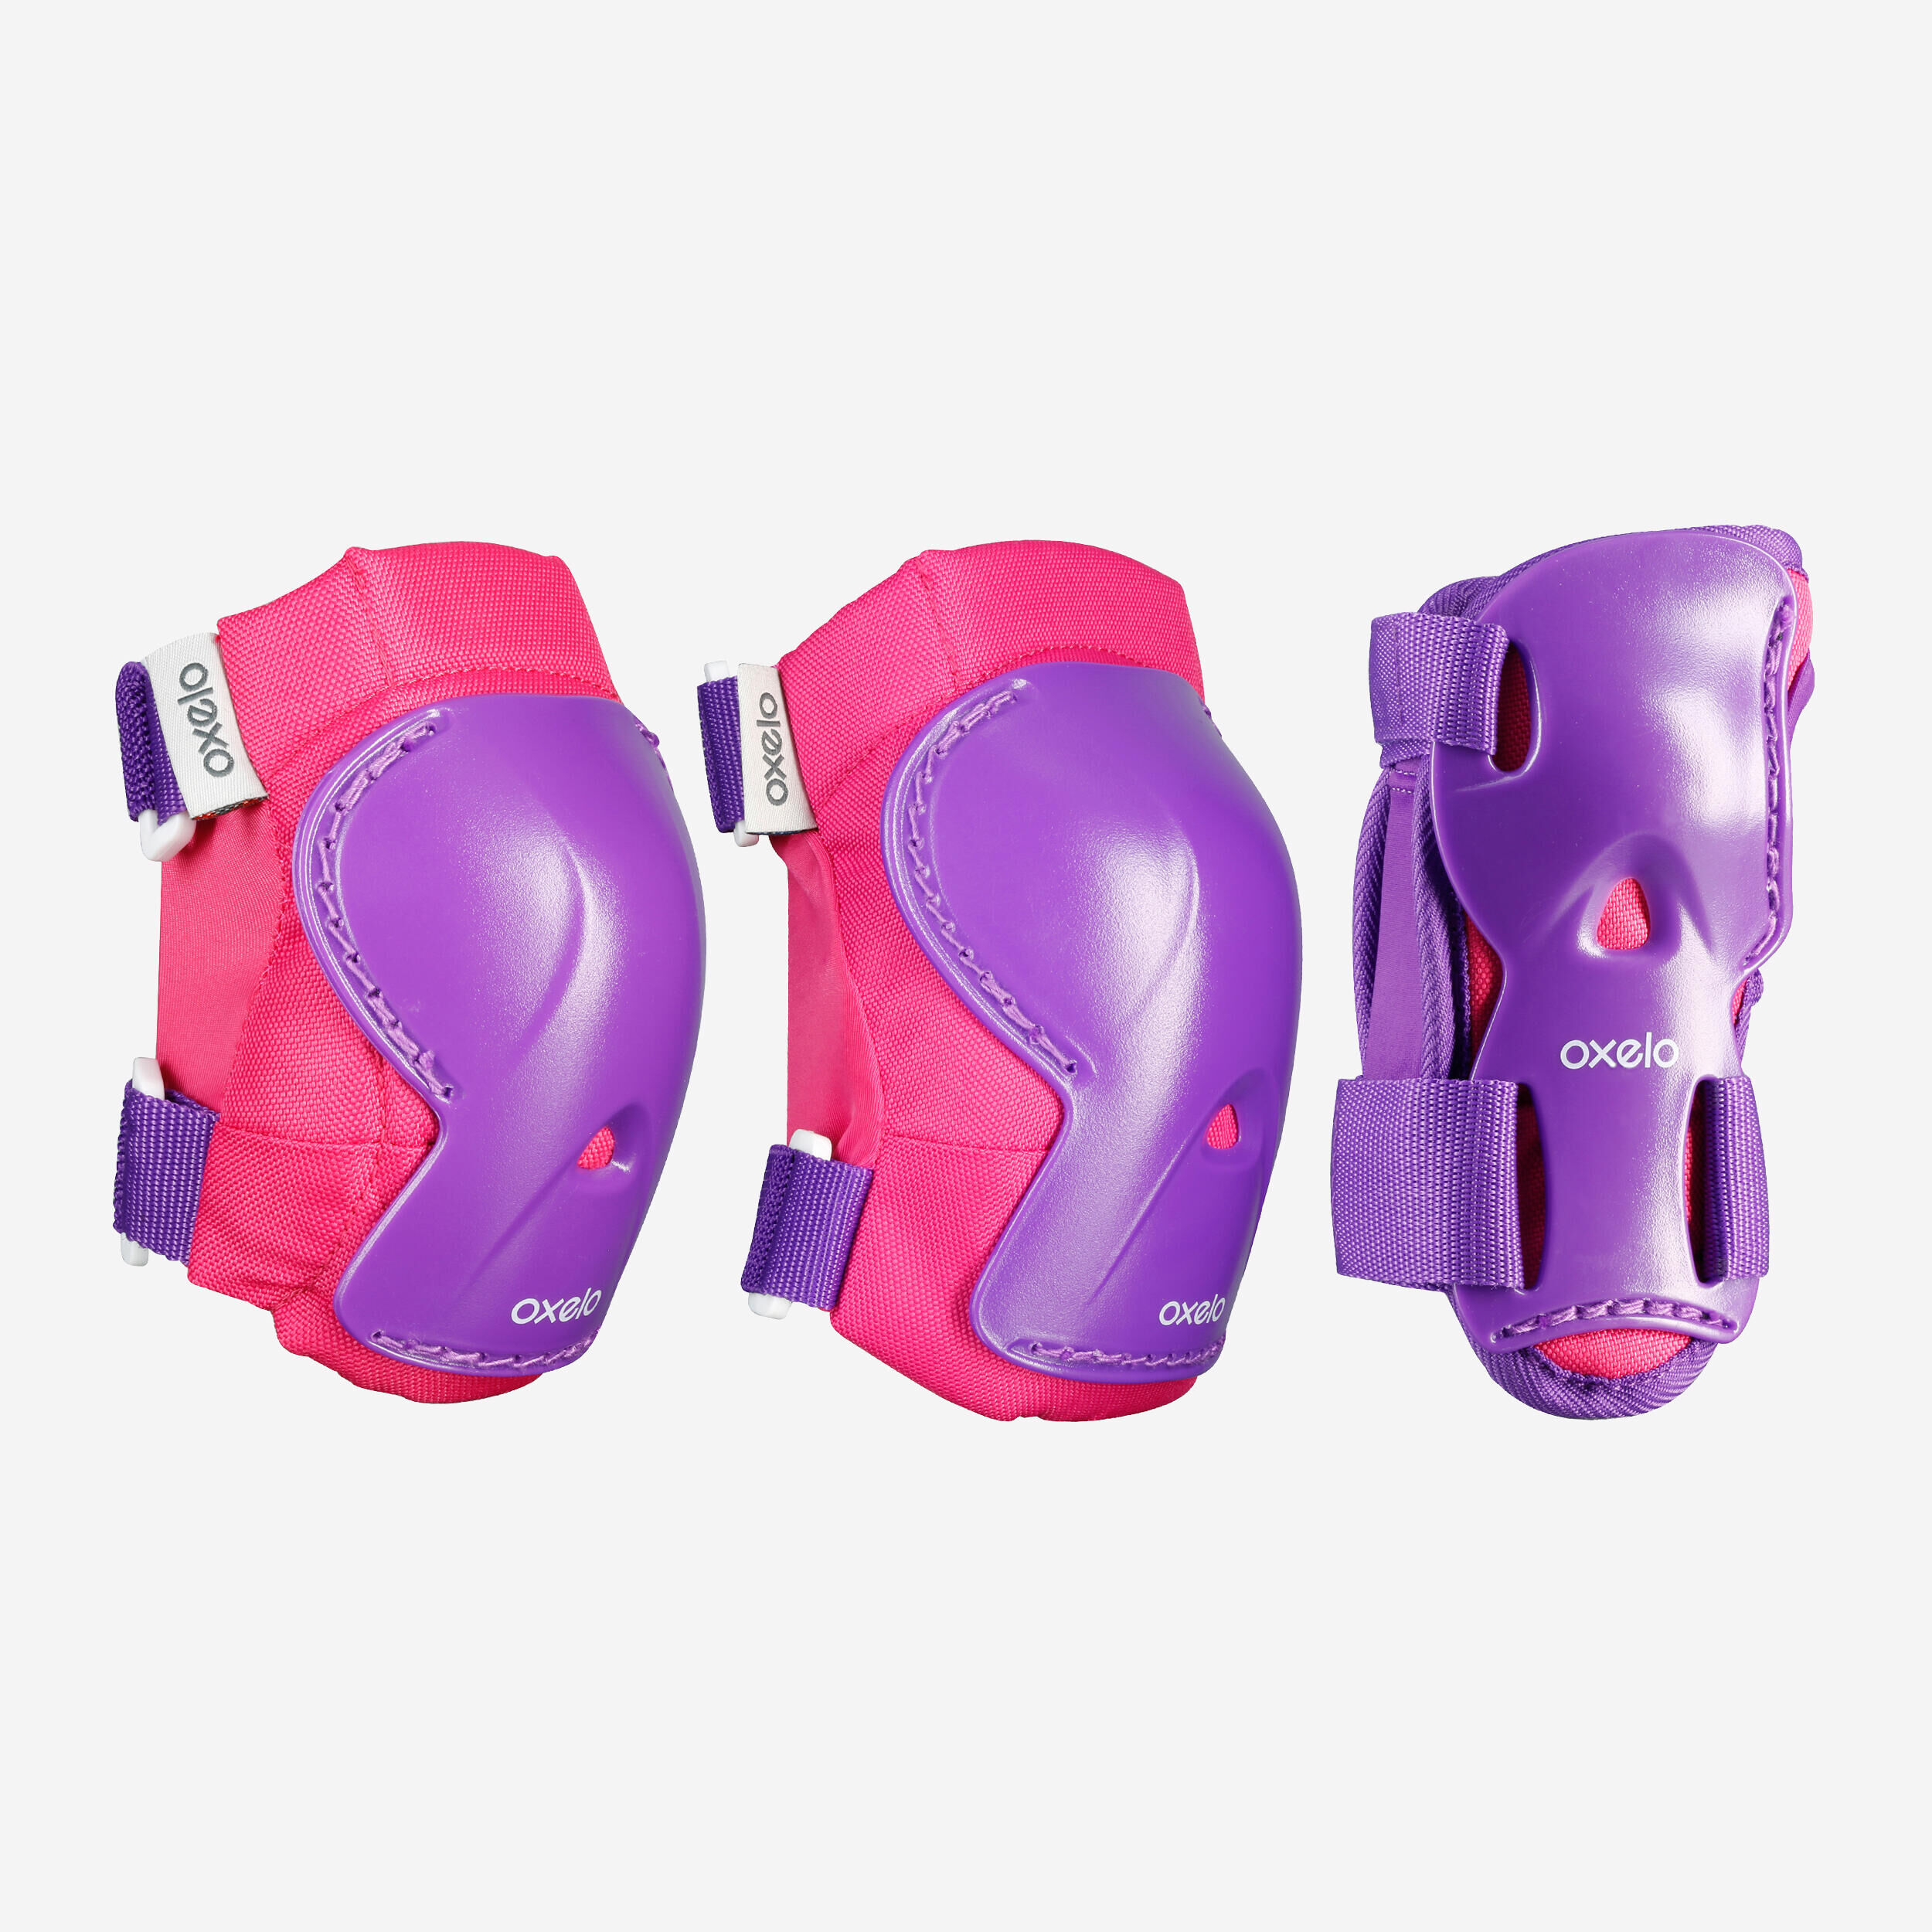 OXELO Kids' 2 x 3-Piece Inline Skating Scooter Skateboard Protective Gear Play - Pink